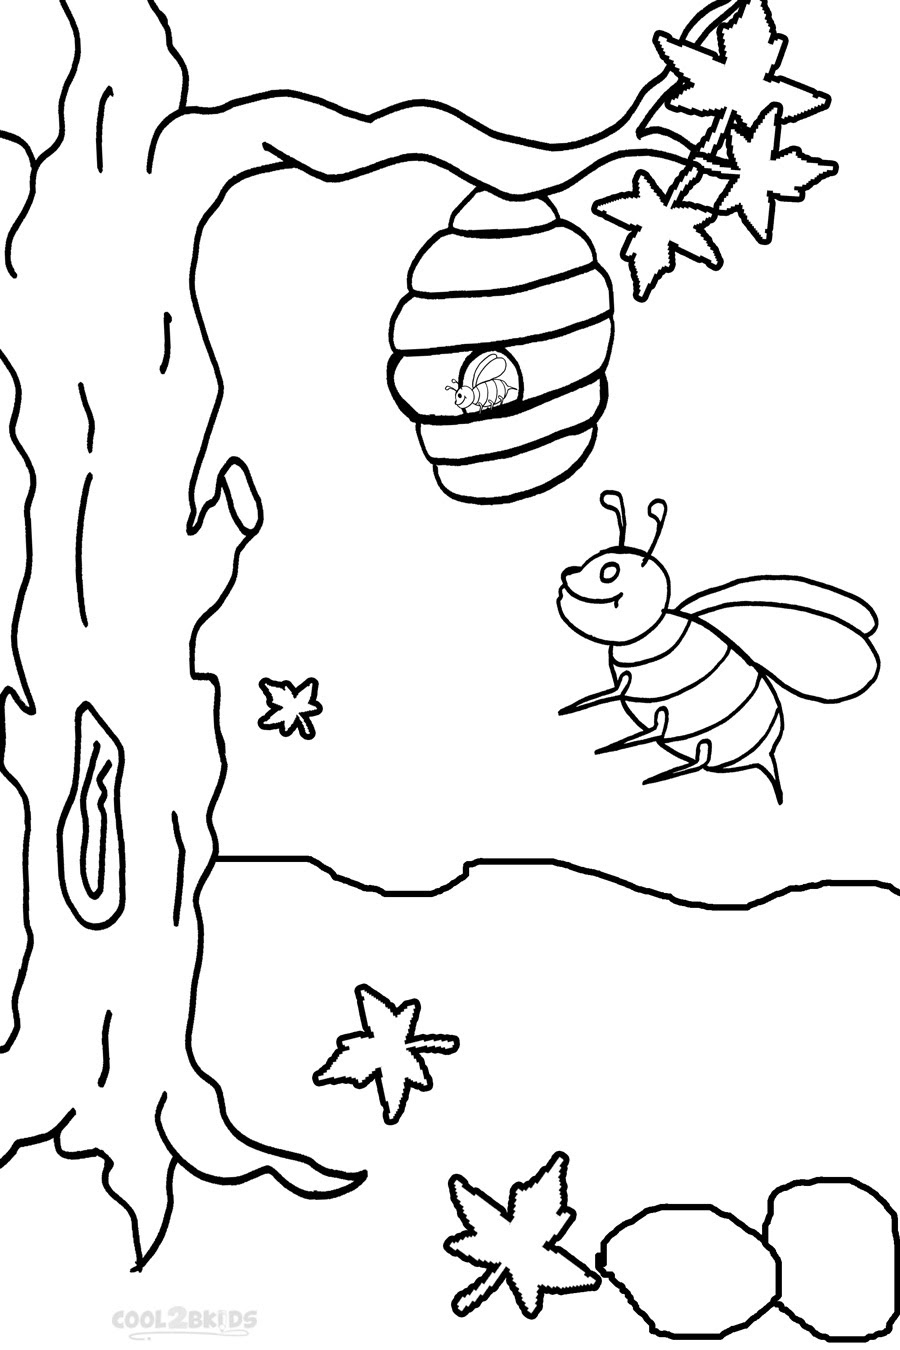 Download Printable Bumble Bee Coloring Pages For Kids | Cool2bKids